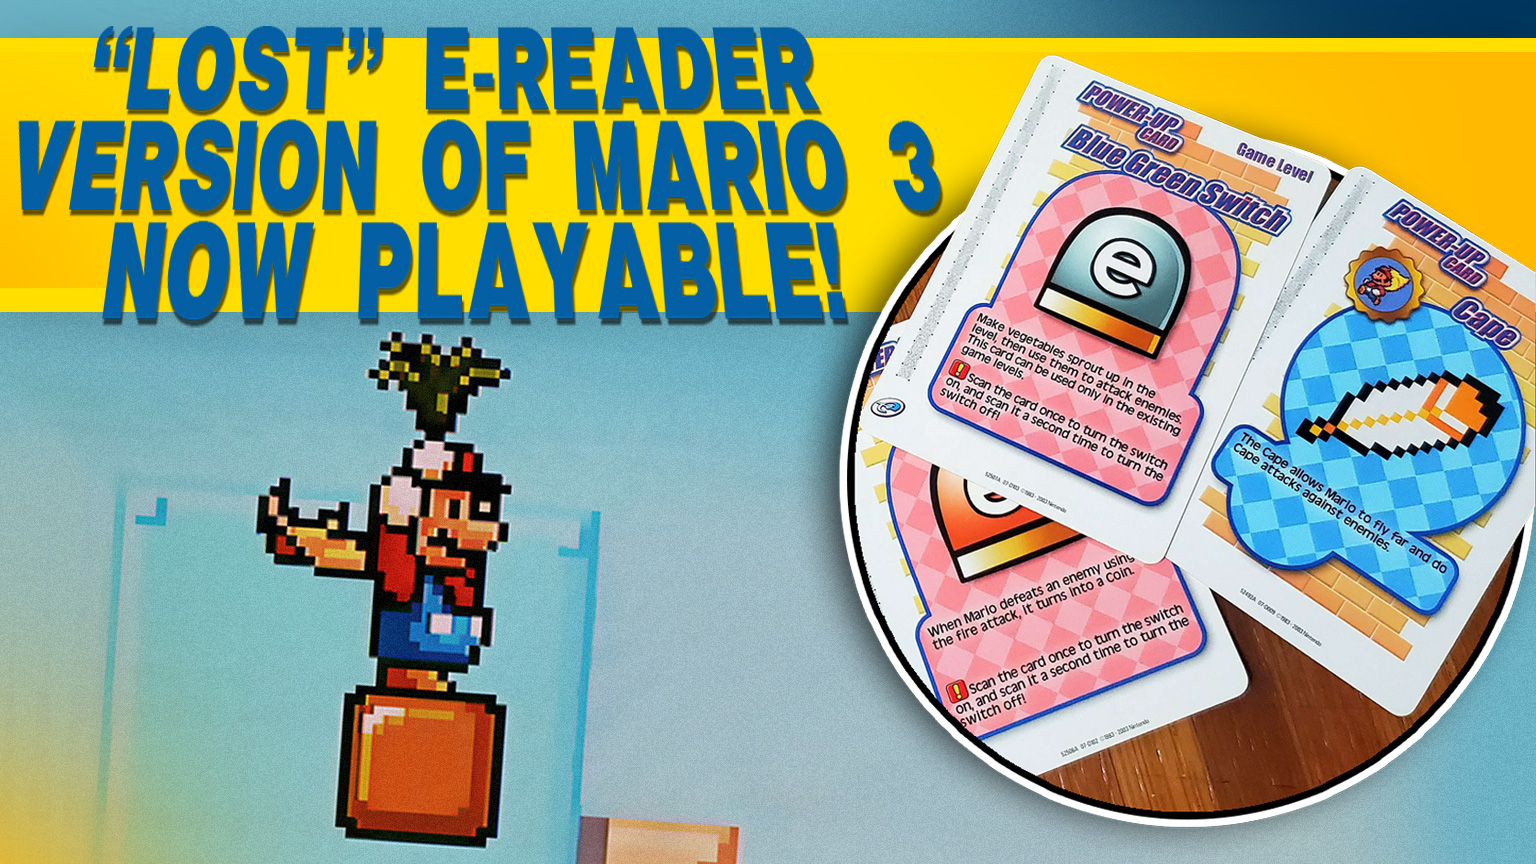 “Lost” E-reader Version of Mario 3 Now Playable